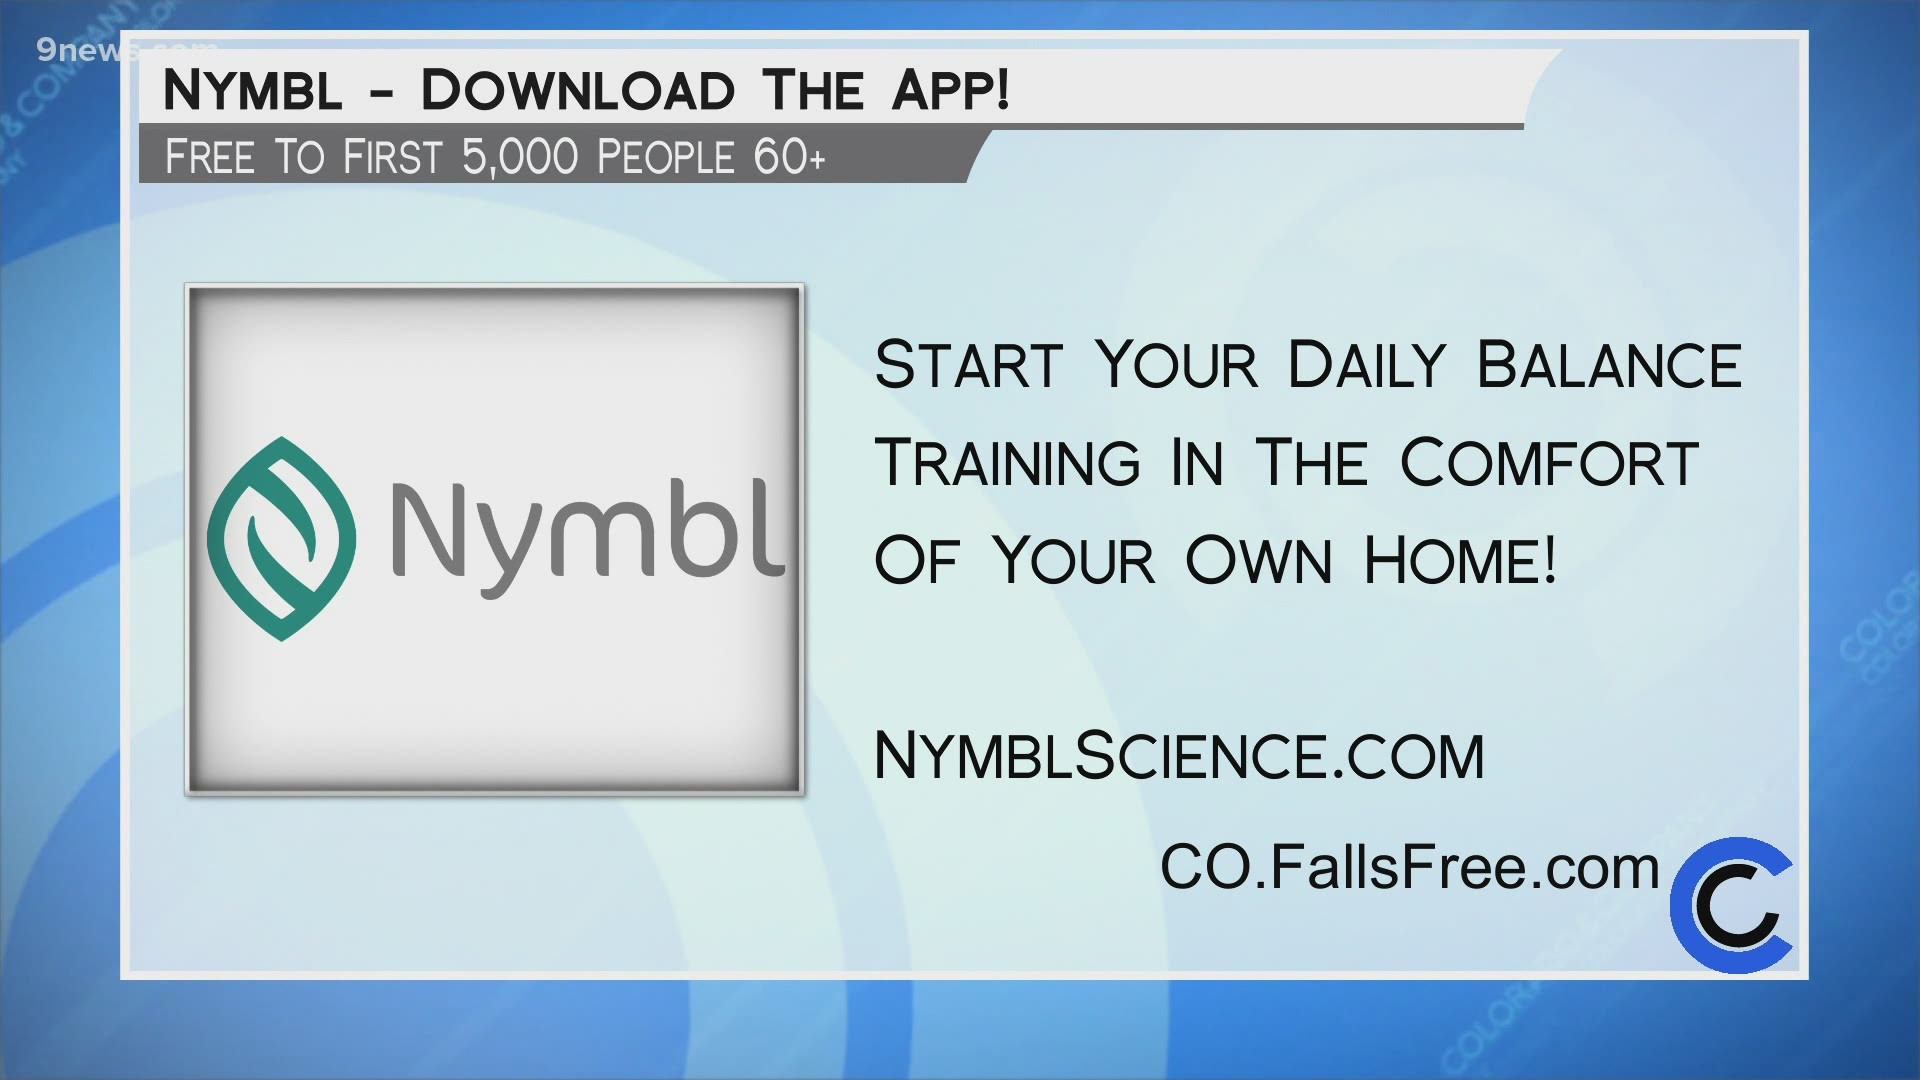 Nymbl is free to the first 5k Coloradans, aged 60 and up. Learn more about getting started at CO.FallsFree.com.